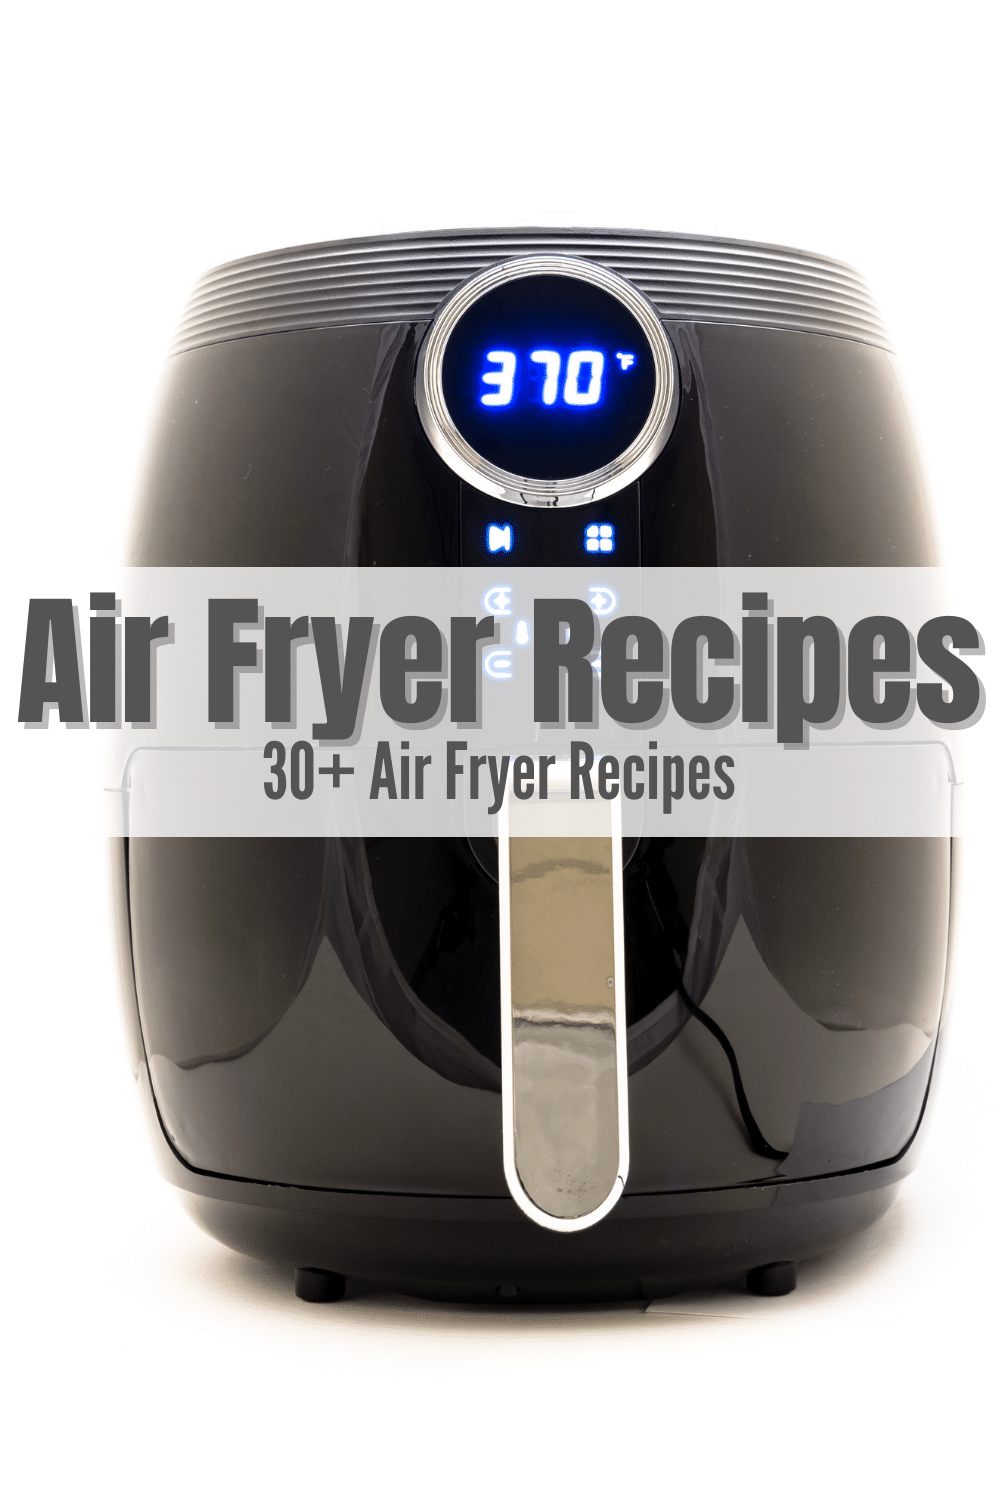 Air fryer recipes are fast, easy, and super delicious. You can make almost any recipe in the air fryer, I promise! Read on to learn all my favorite air fryer recipes from meatloaf to egg cups. via @vegetarianmamma